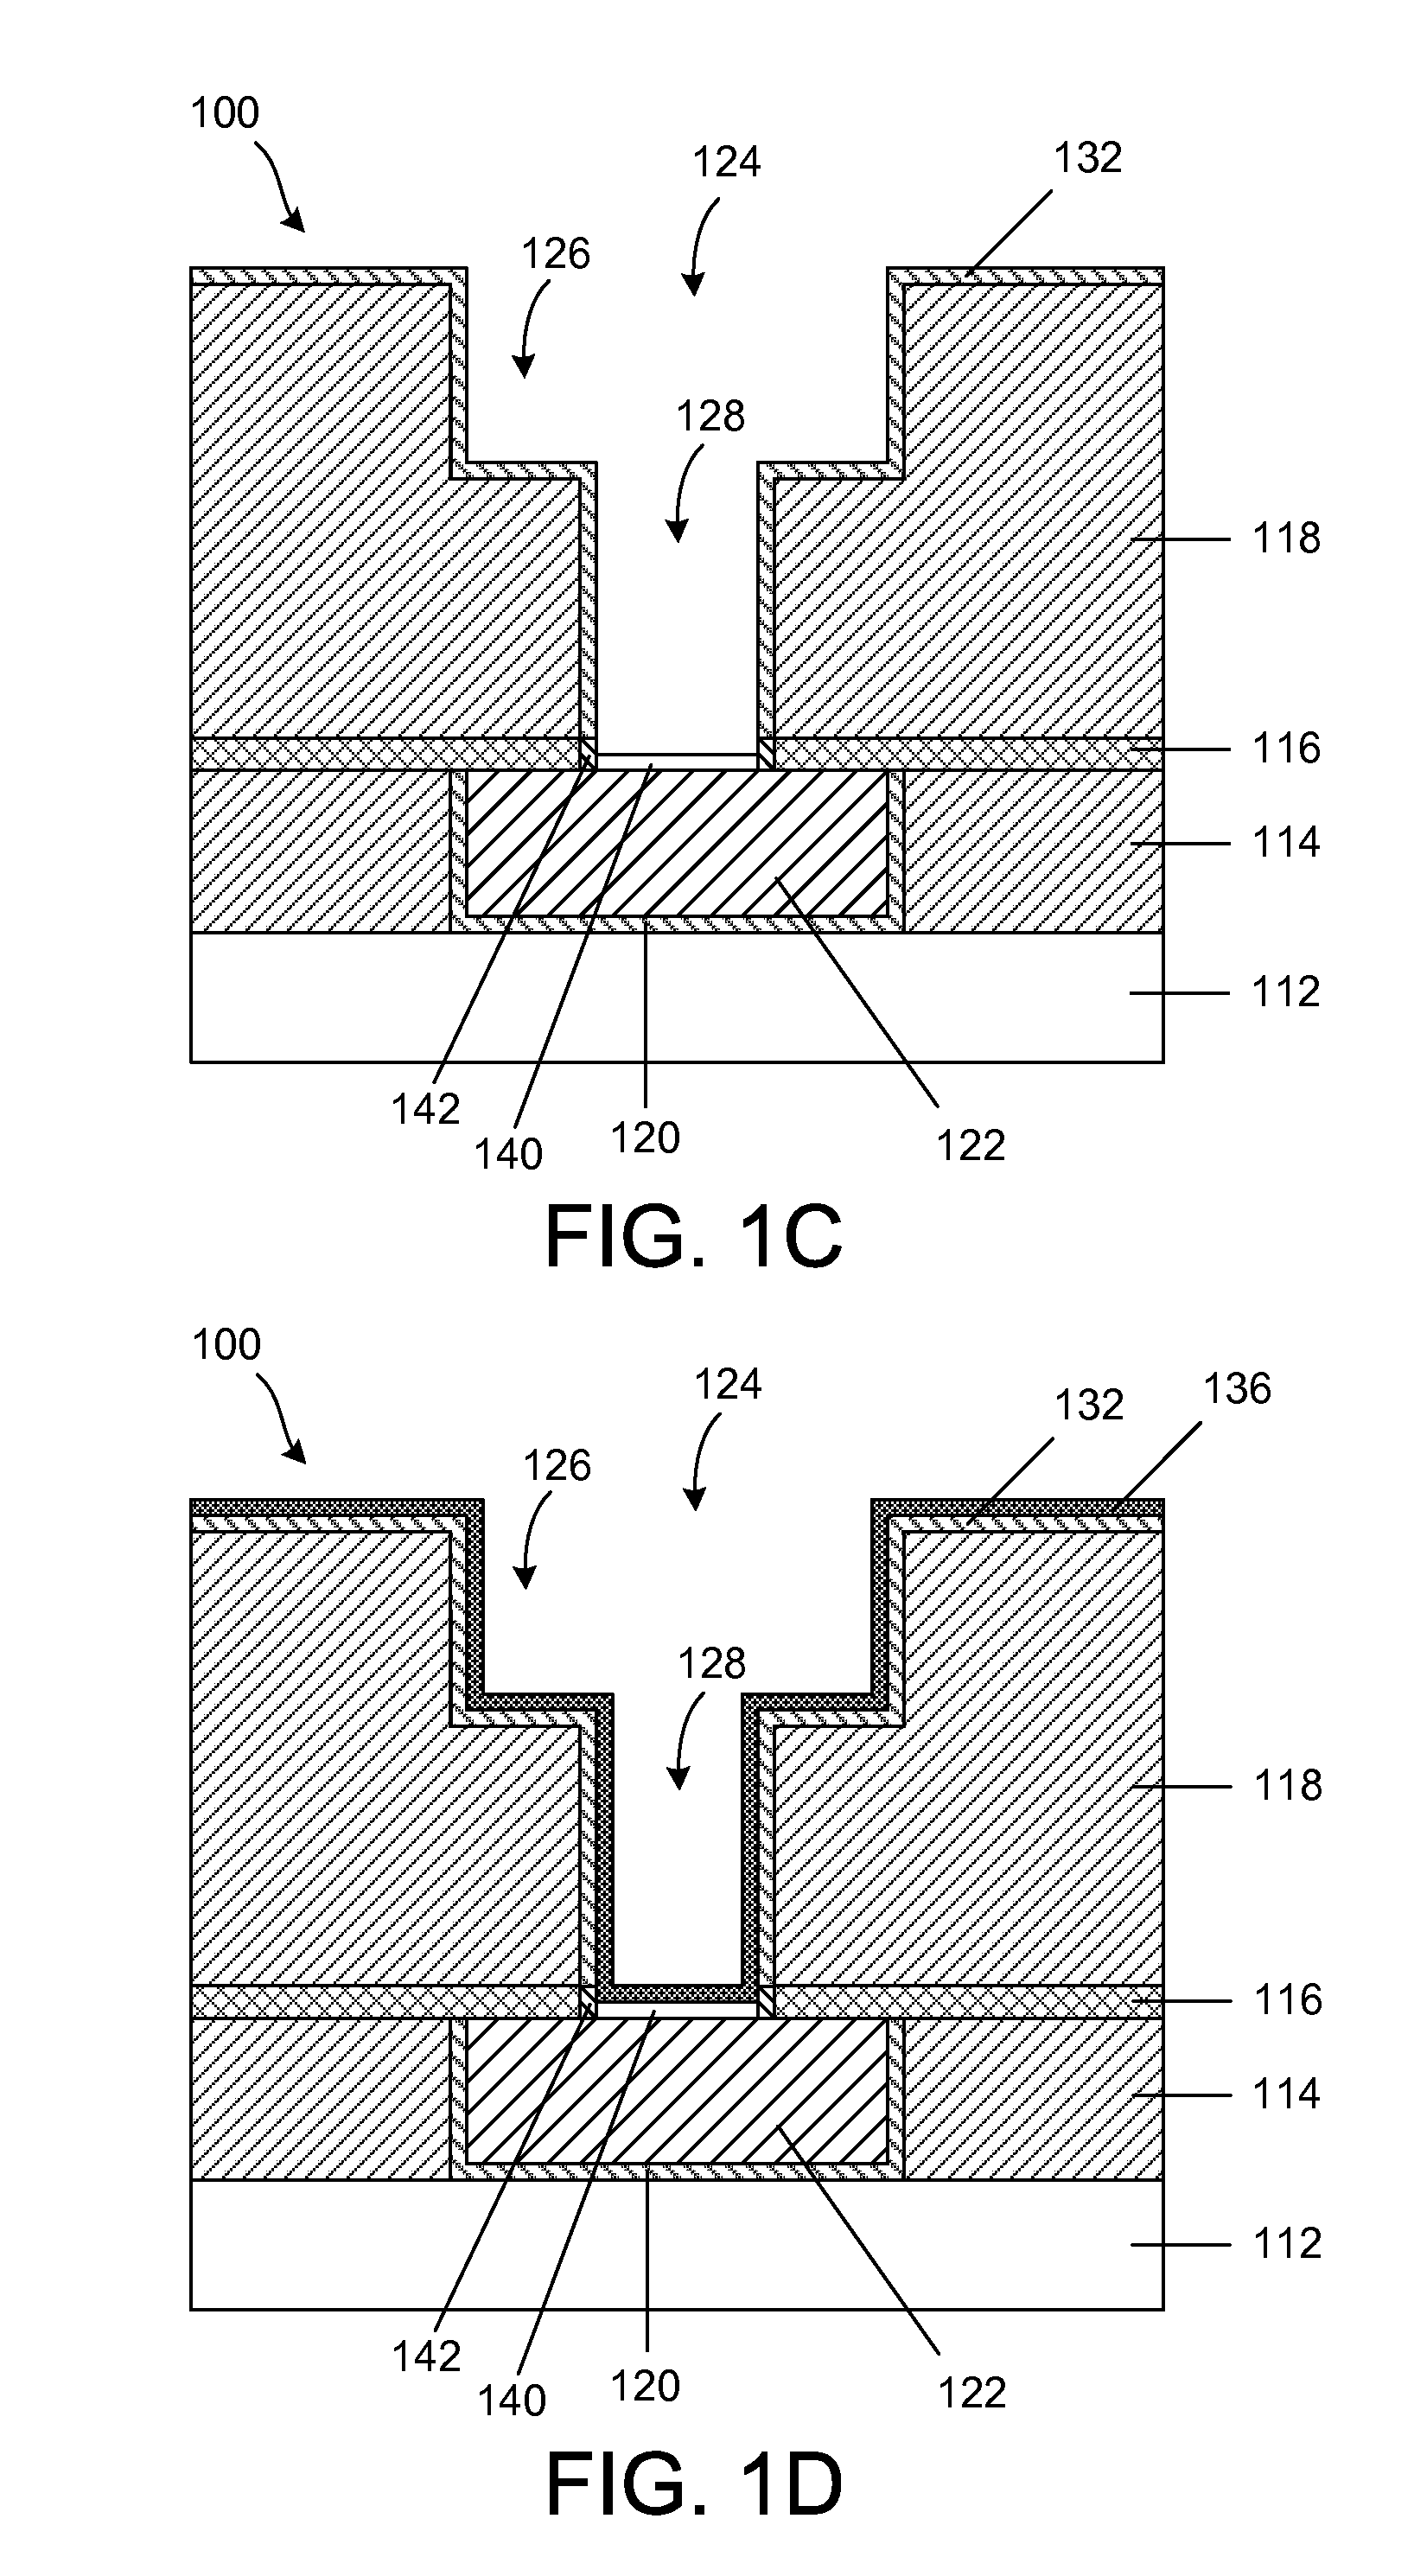 Diffusion barrier and adhesion layer for an interconnect structure